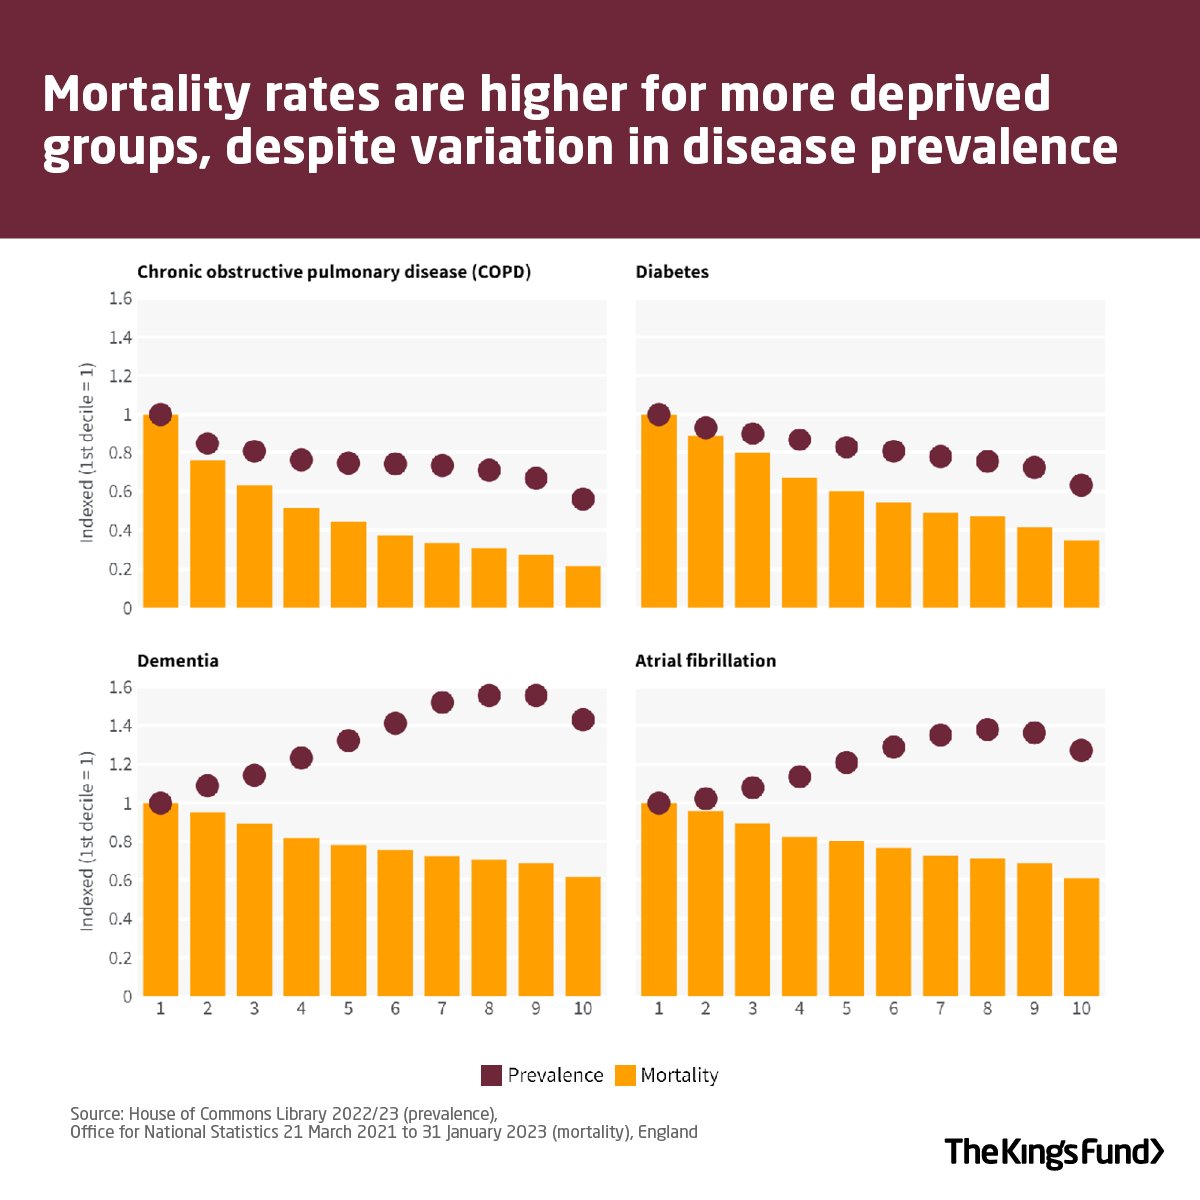 Our analysis also uncovers a potentially worrying pattern where, for some health conditions, prevalence is actually lower in the most deprived areas yet deaths from those conditions are higher.